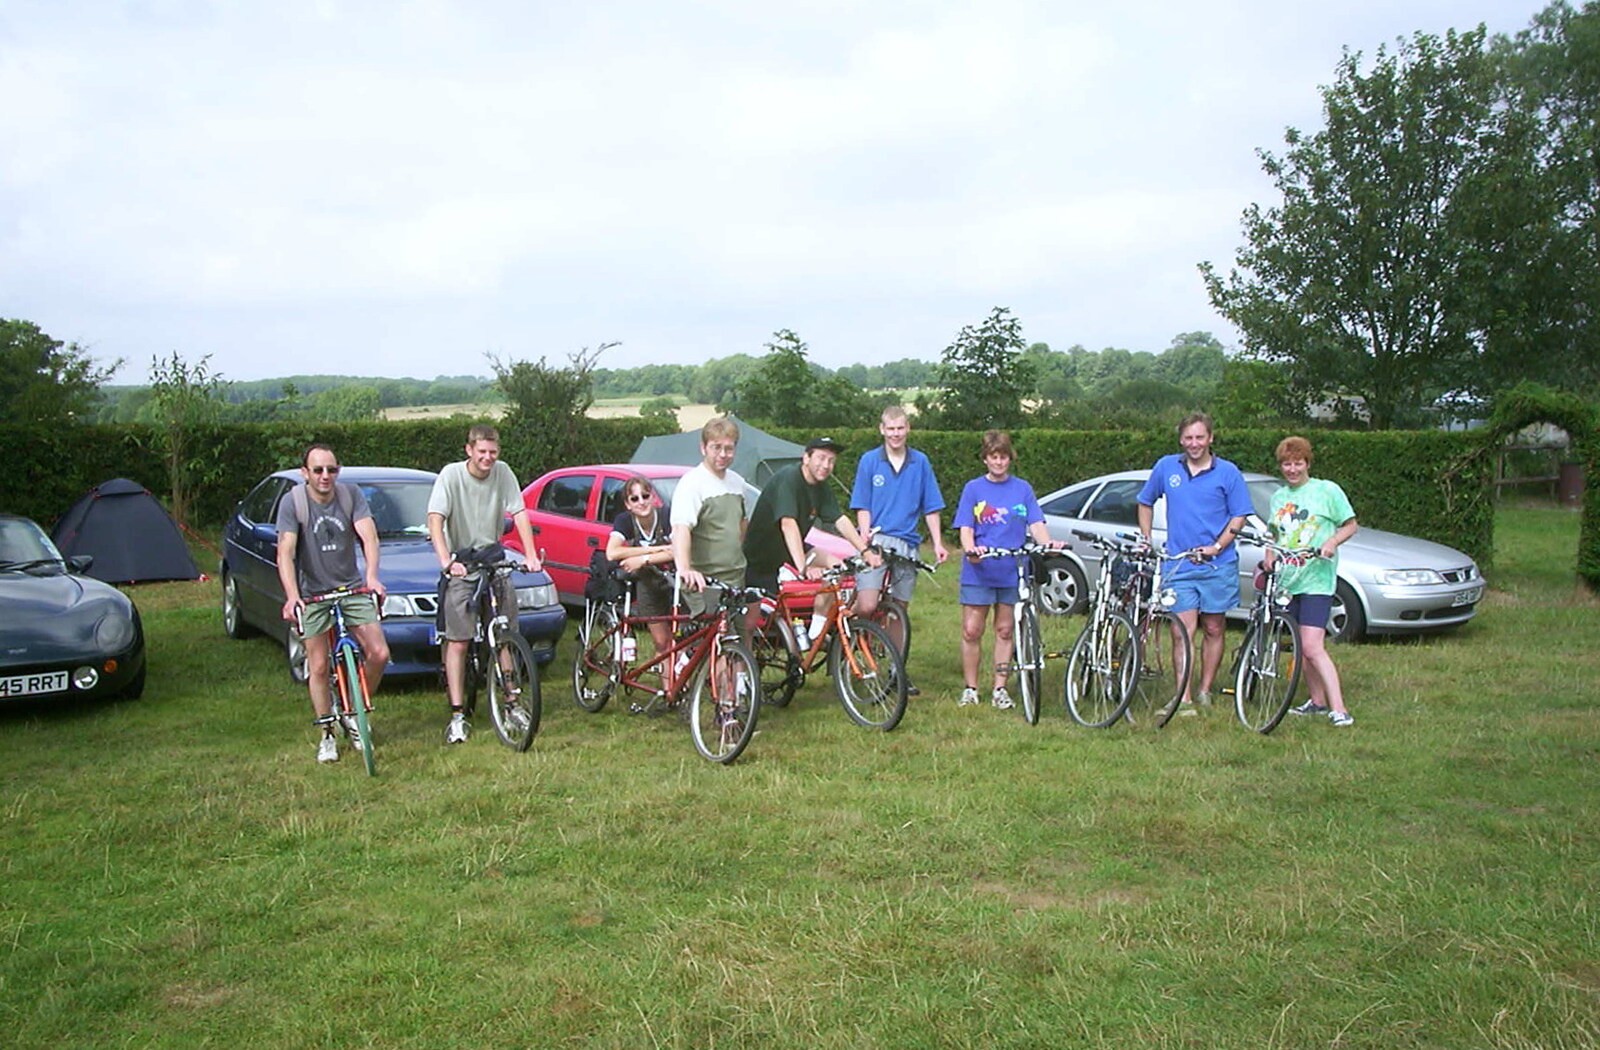 A BSCC Splinter Group Camping Weekend, Theberton, Suffolk - 11th August 2002: The bike group, prior to the off